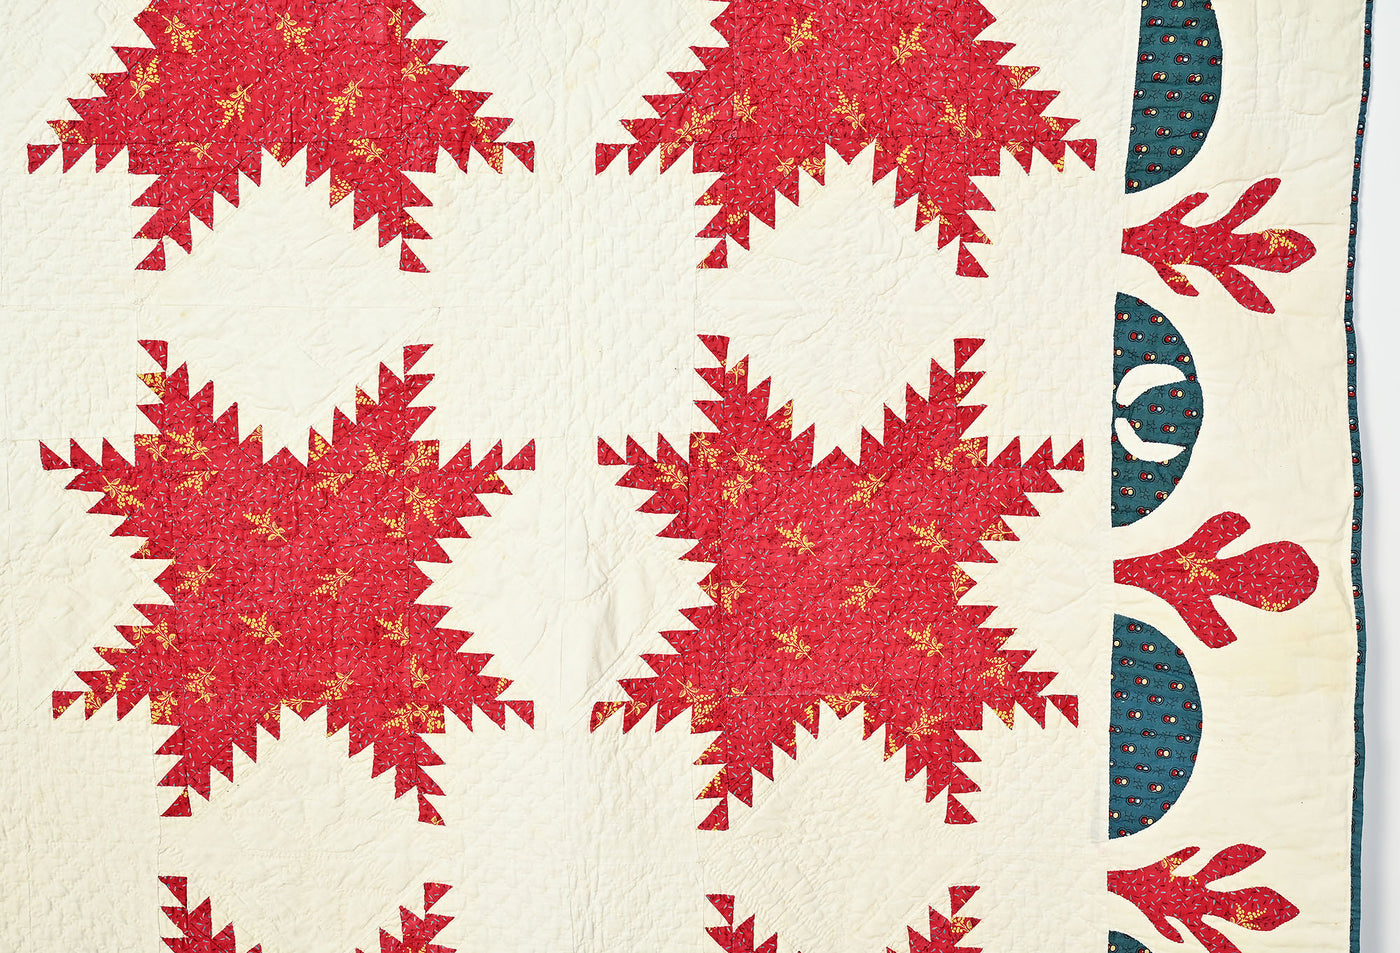 Feathered Stars Antique Quilt with Swag Border